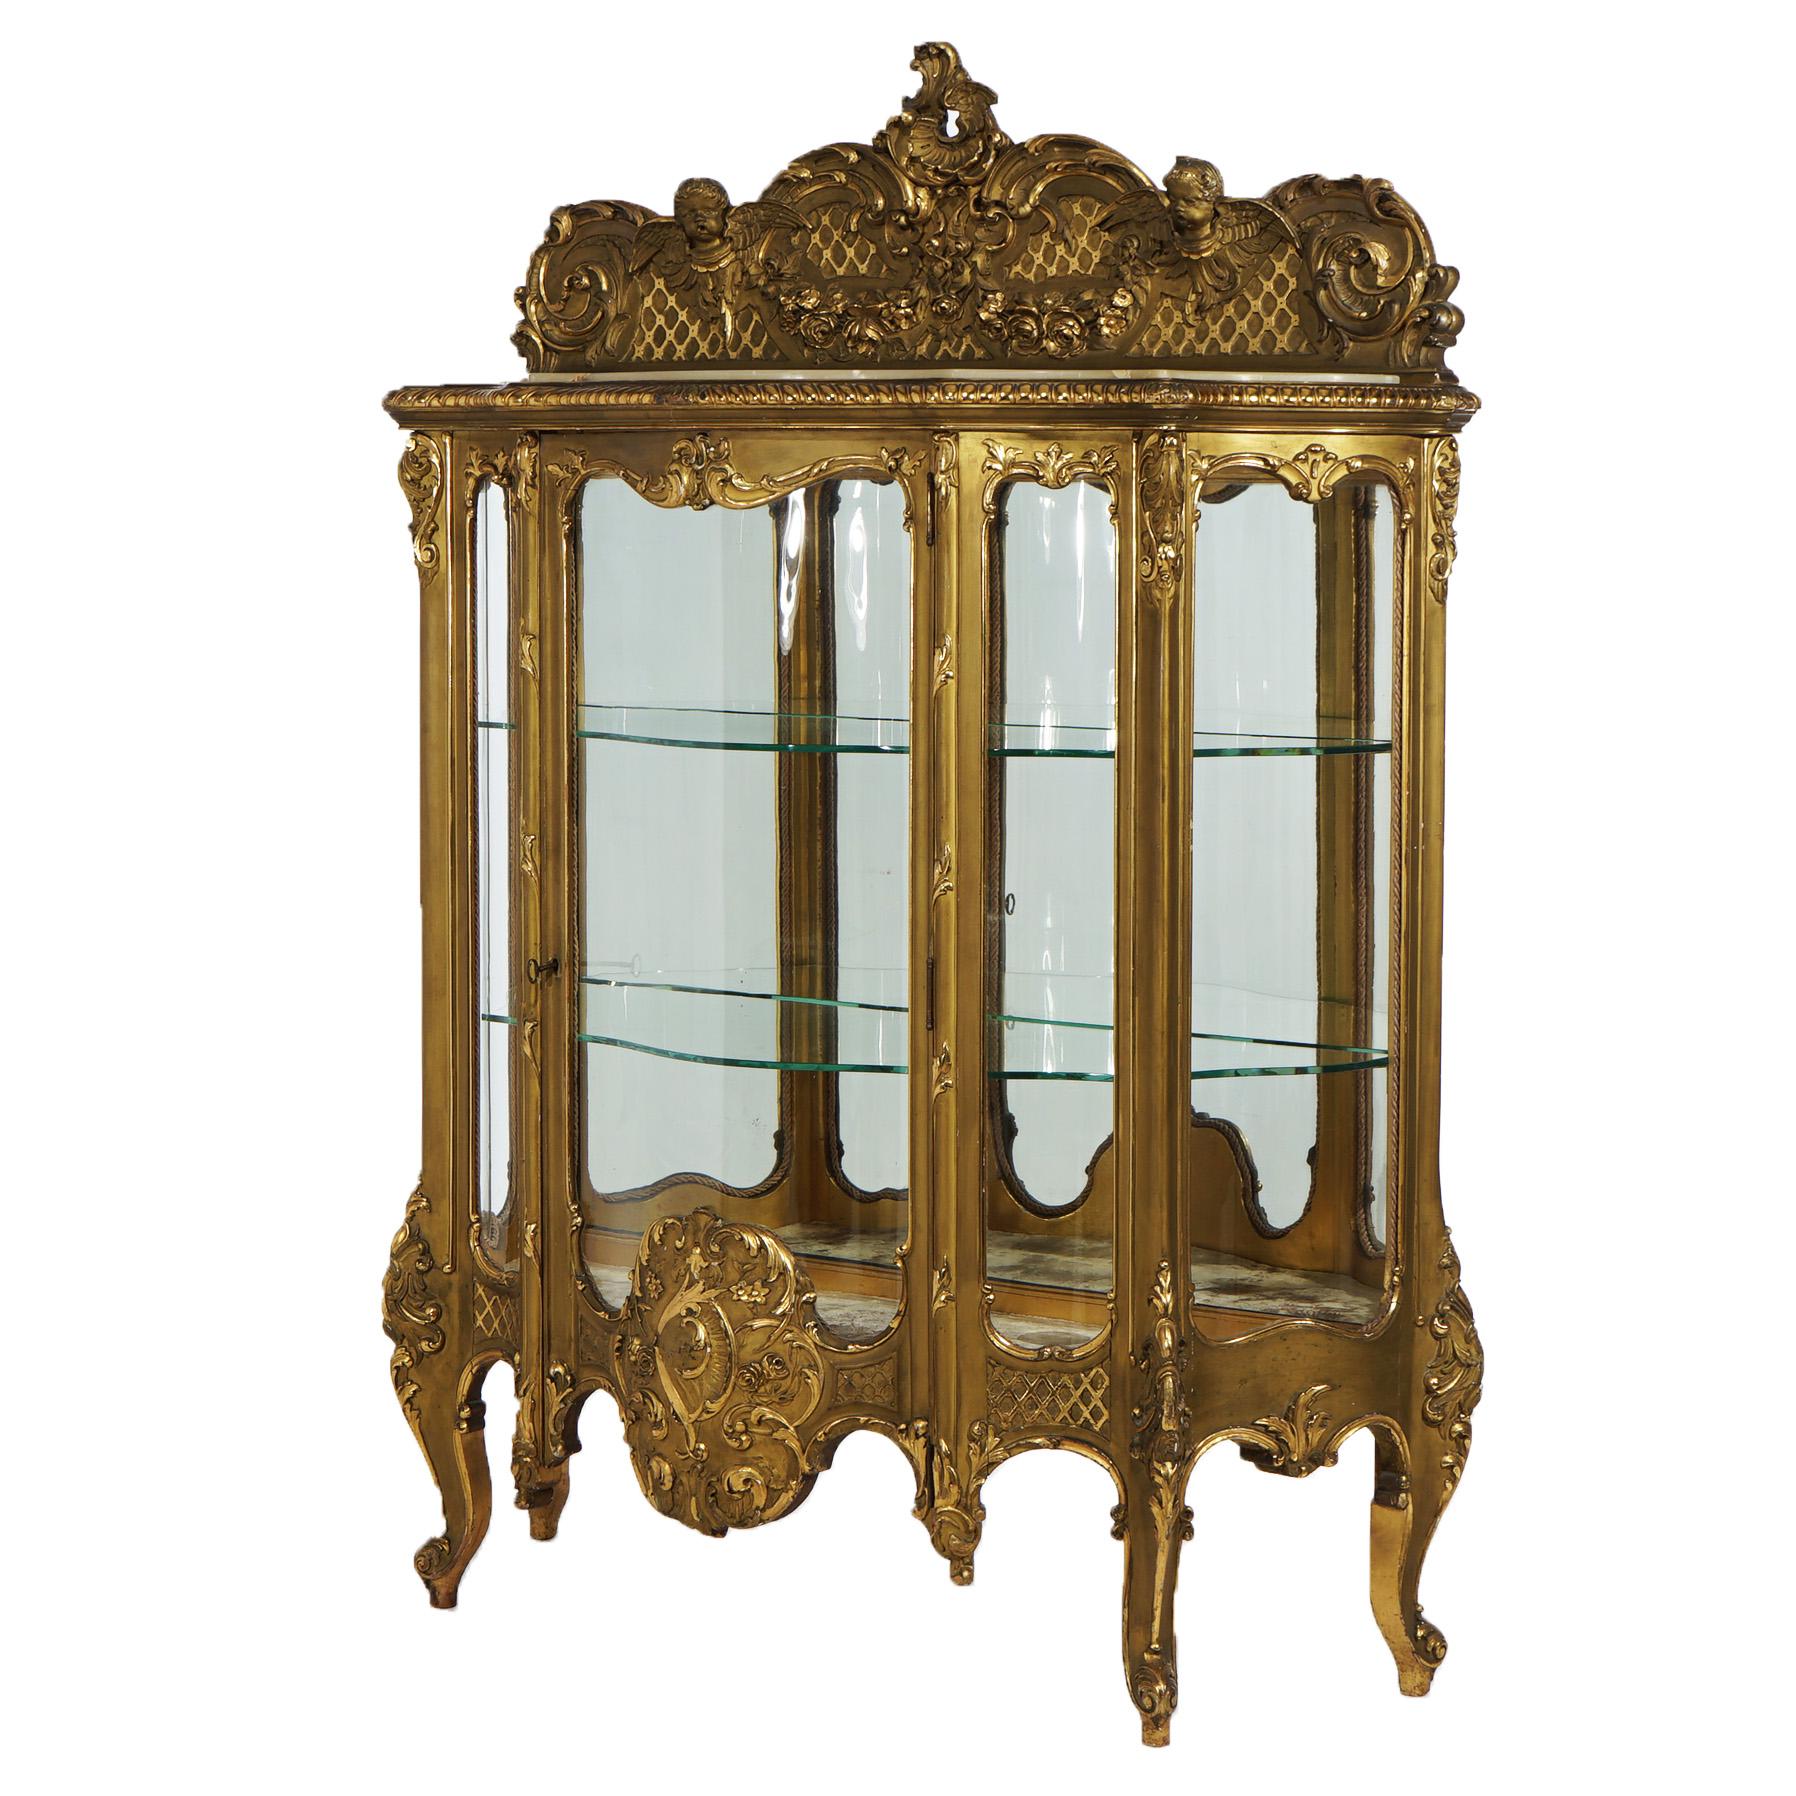 ***Ask About Reduced In-House Shipping Rates - Reliable Service & Fully Insured***
Oversized antique French Rococo display vitrine offers giltwood construction with figural crest over marble top shaped case having single glass door opening to